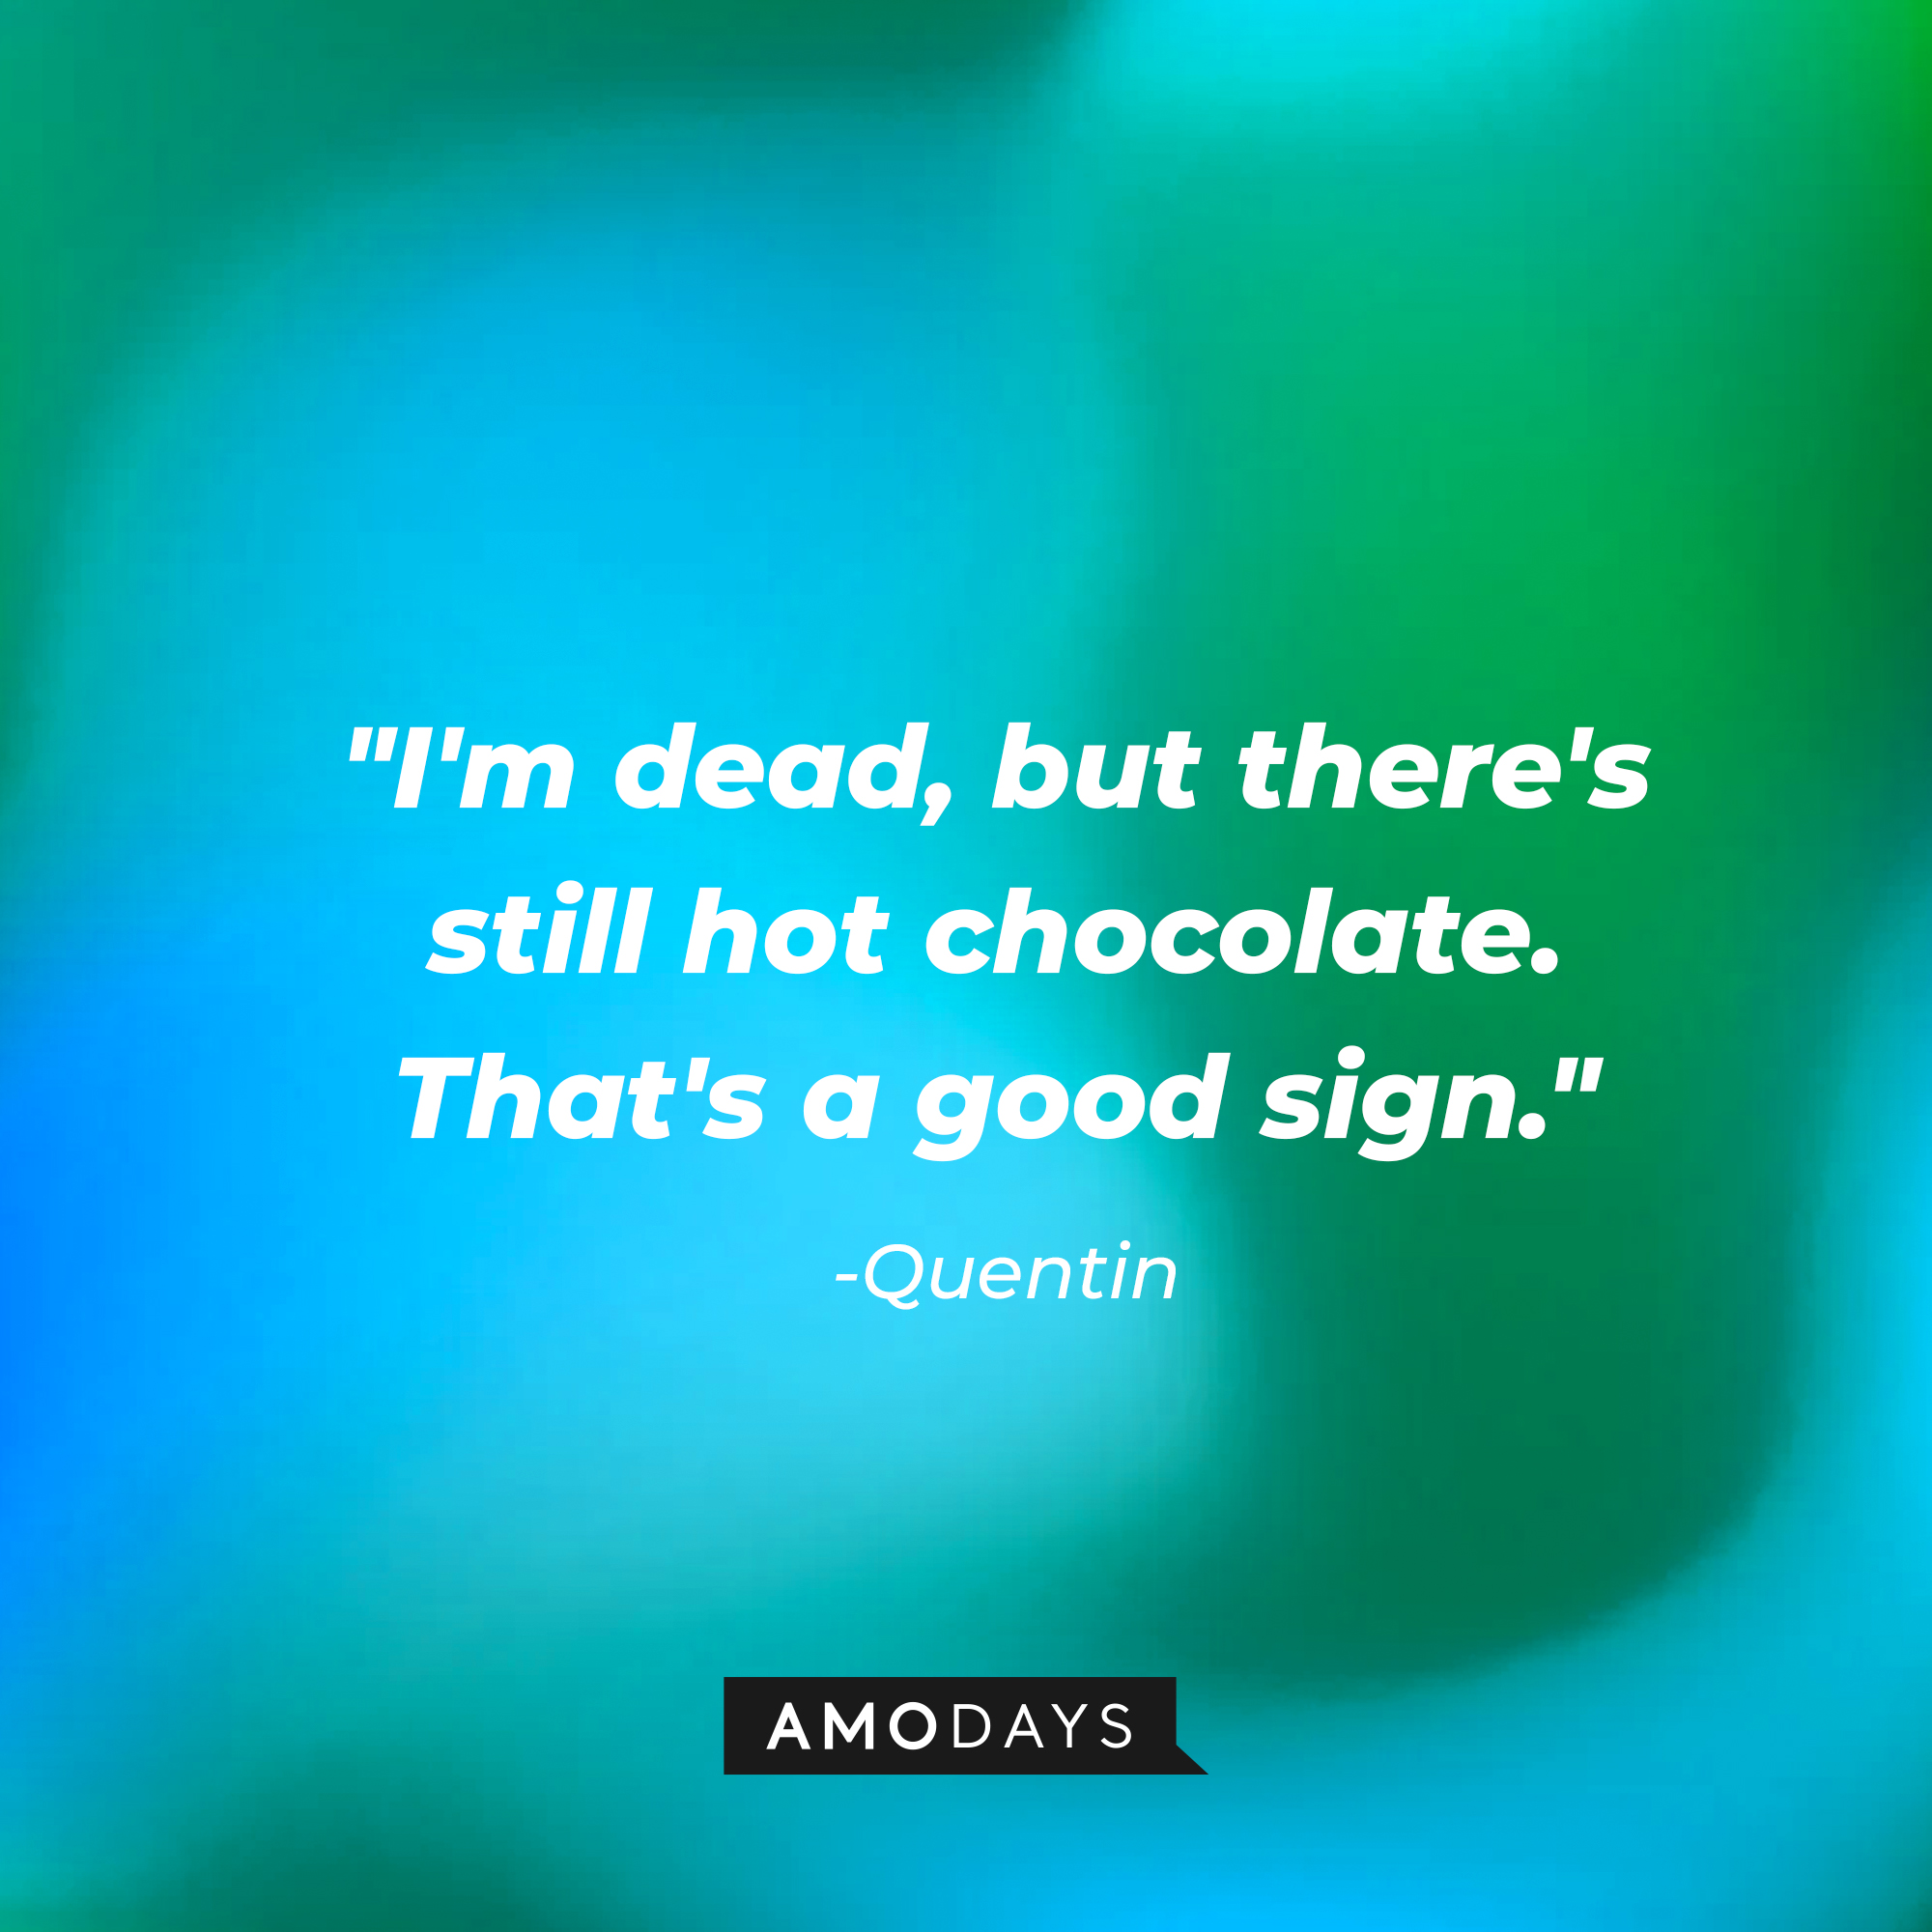 Quentin’s quotes: "I'm dead, but there's still hot chocolate. That's a good sign." | Source: AmoDays